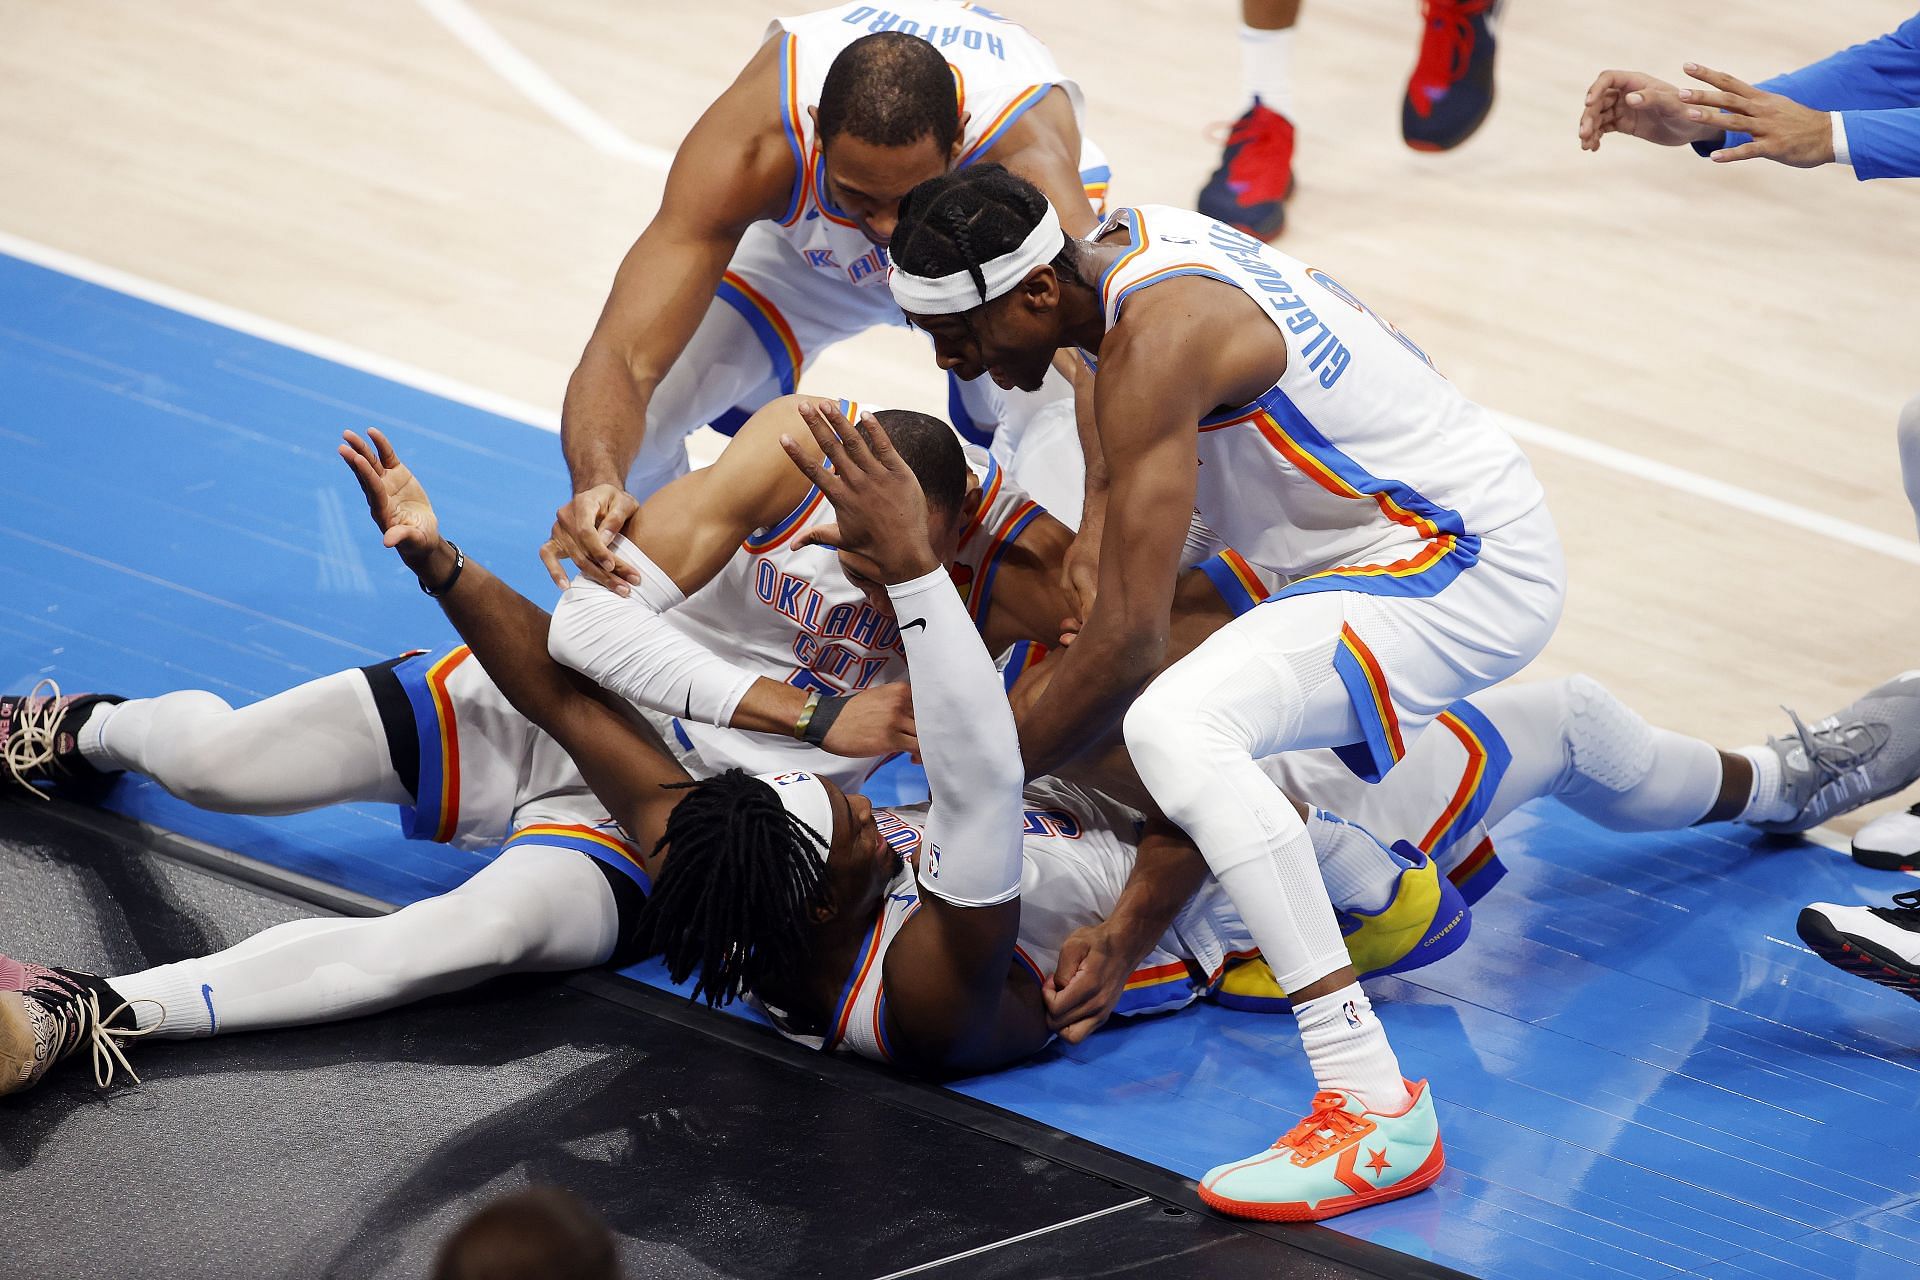 The OKC Thunder could add some locker room veterans to help the team get to the next level